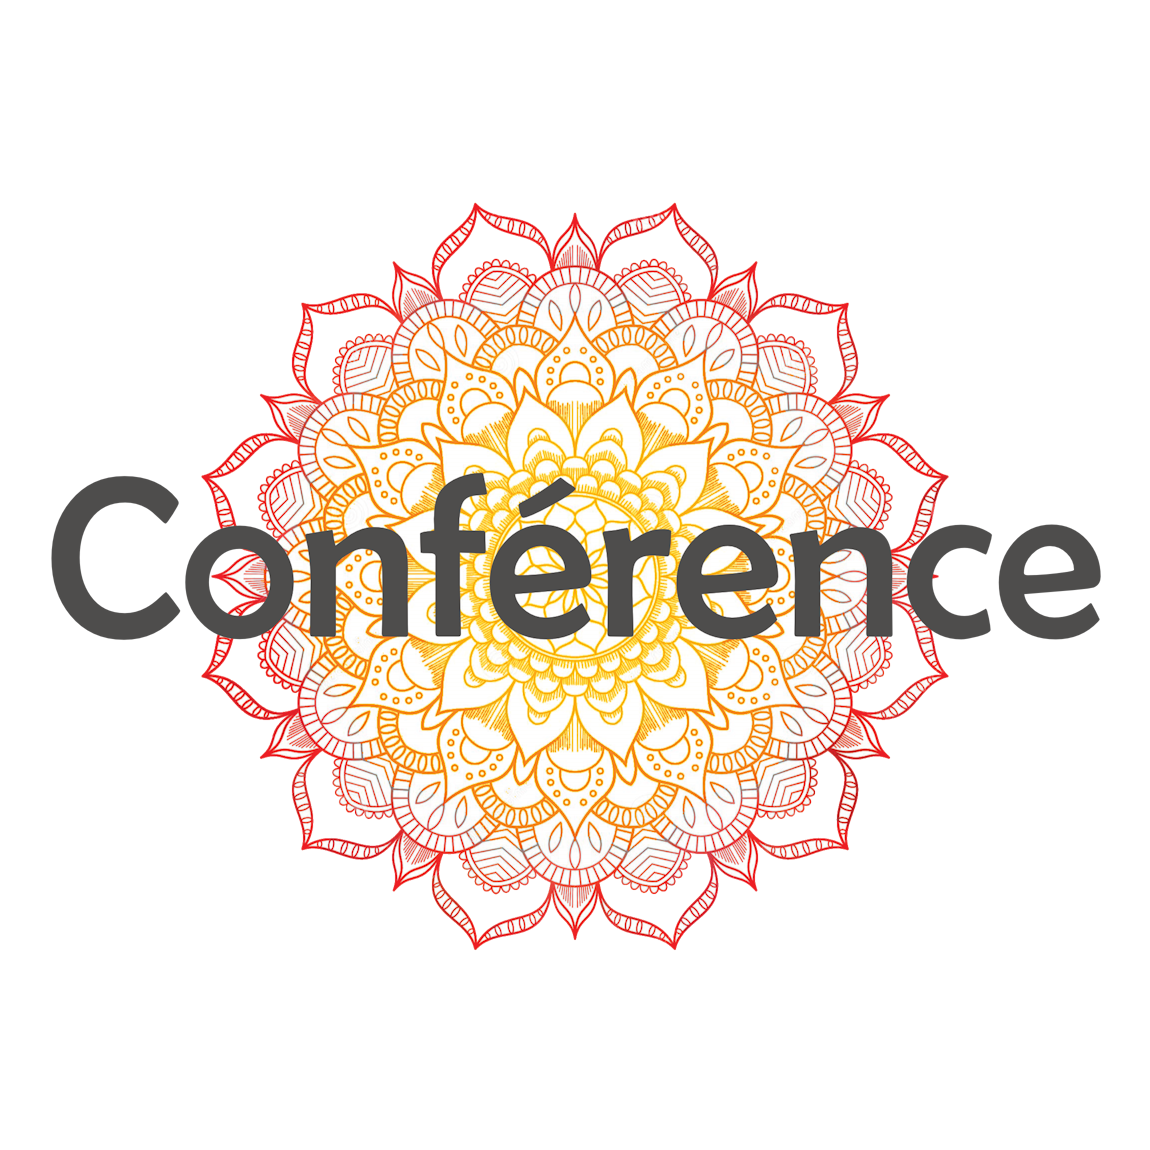 Bouton conference carre